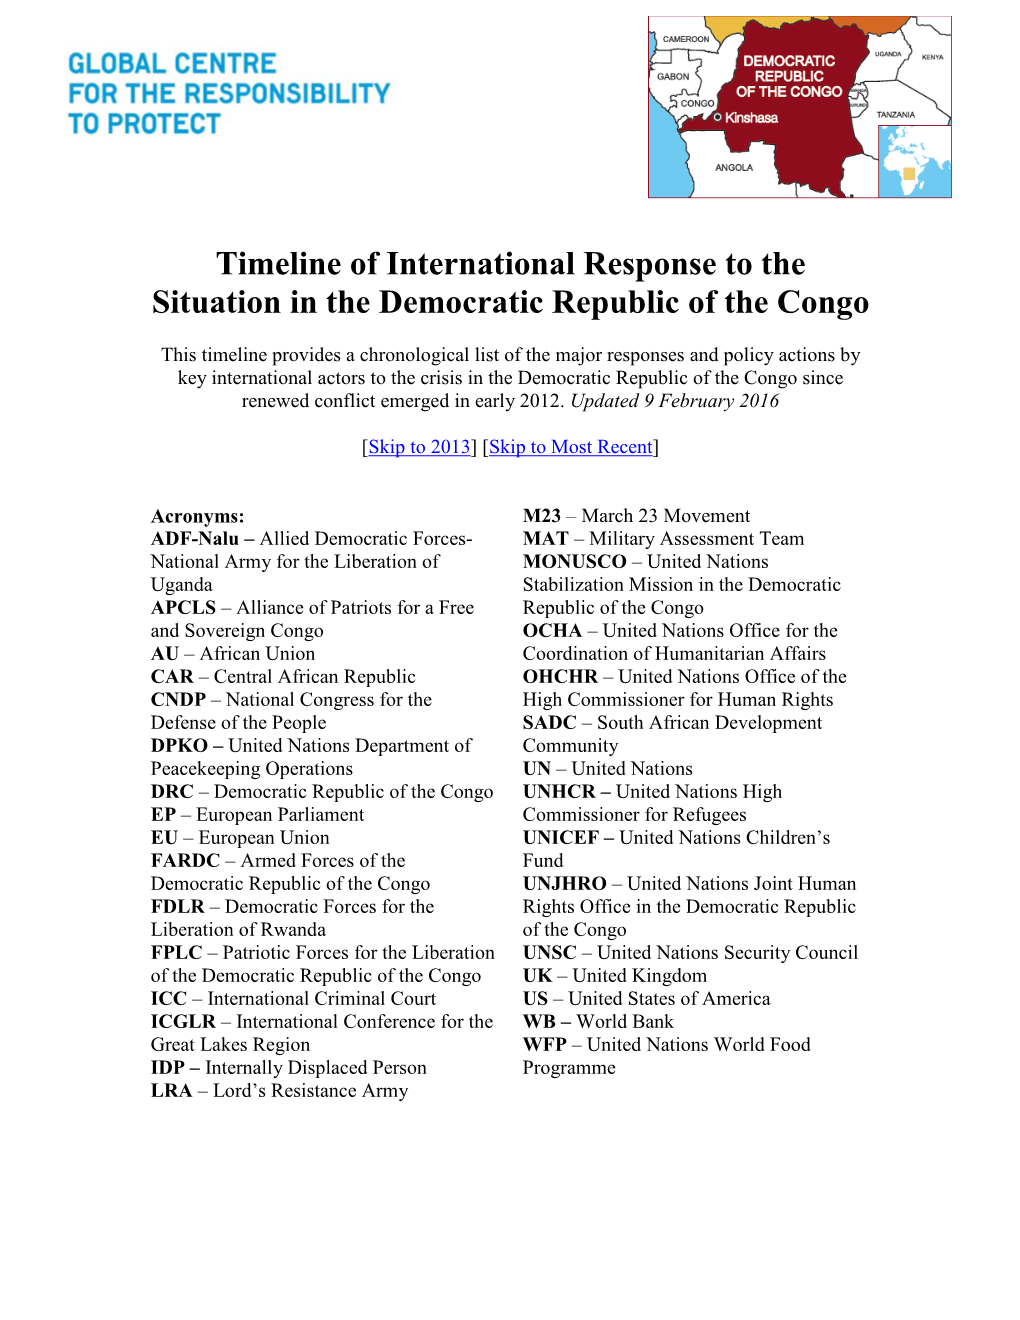 Timeline of International Response to the Situation in the Democratic Republic of the Congo